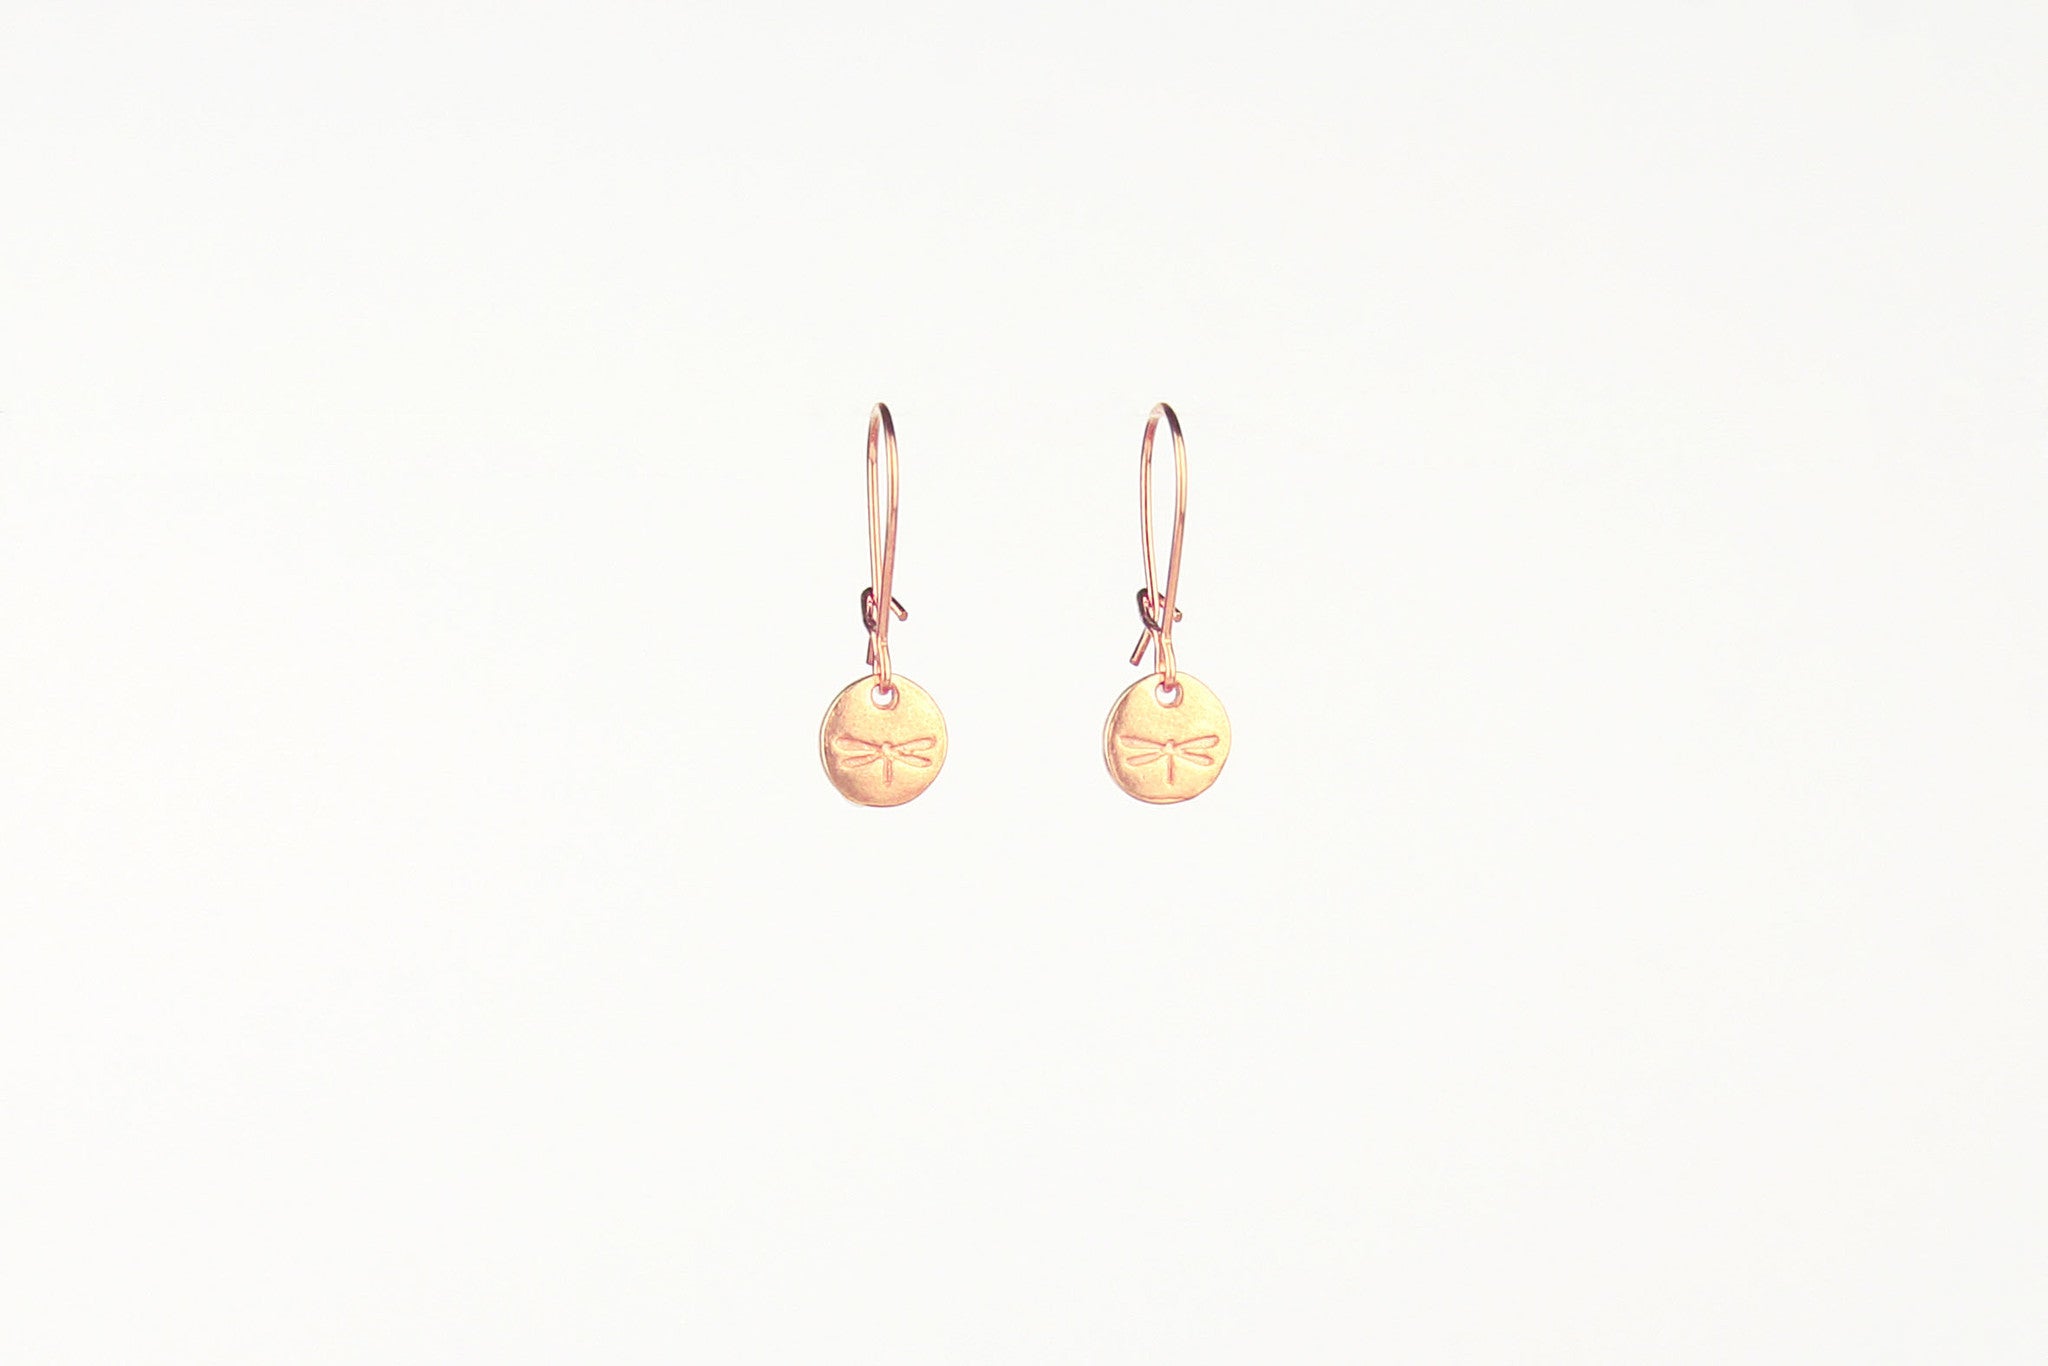 jewelberry ohrringe earrings dragonfly token rose gold plated sterling silver fine jewelry handmade with love fairtrade